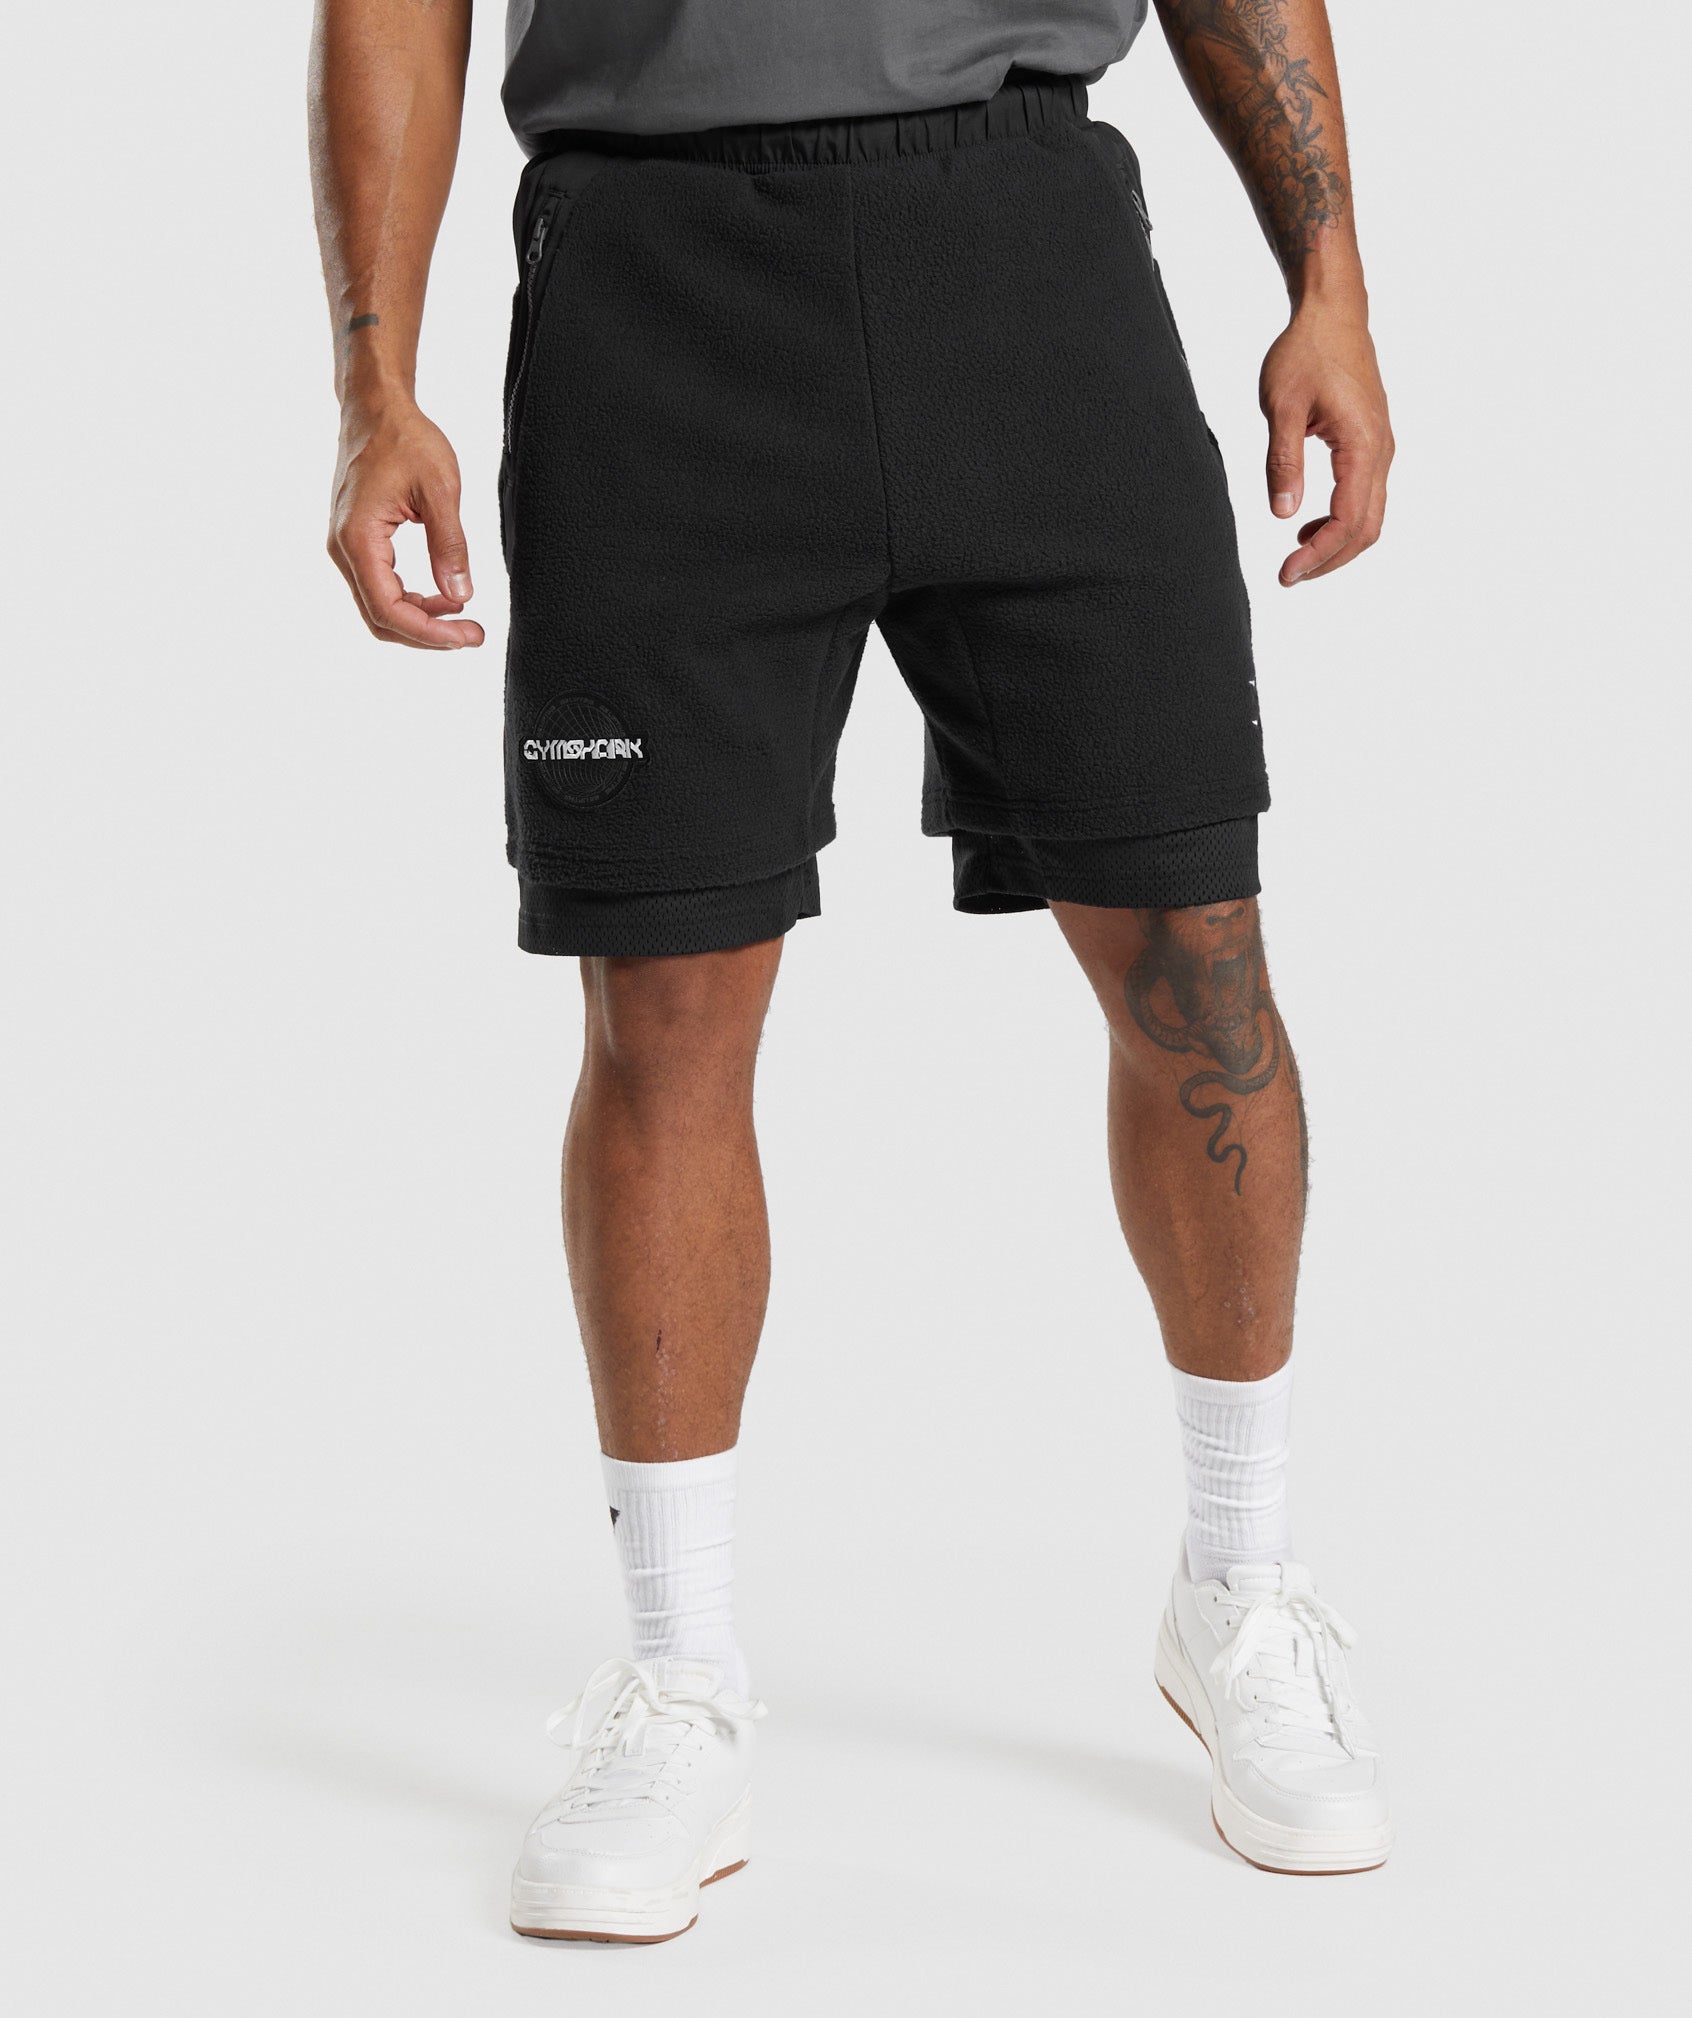 Vibes Shorts in Black - view 1